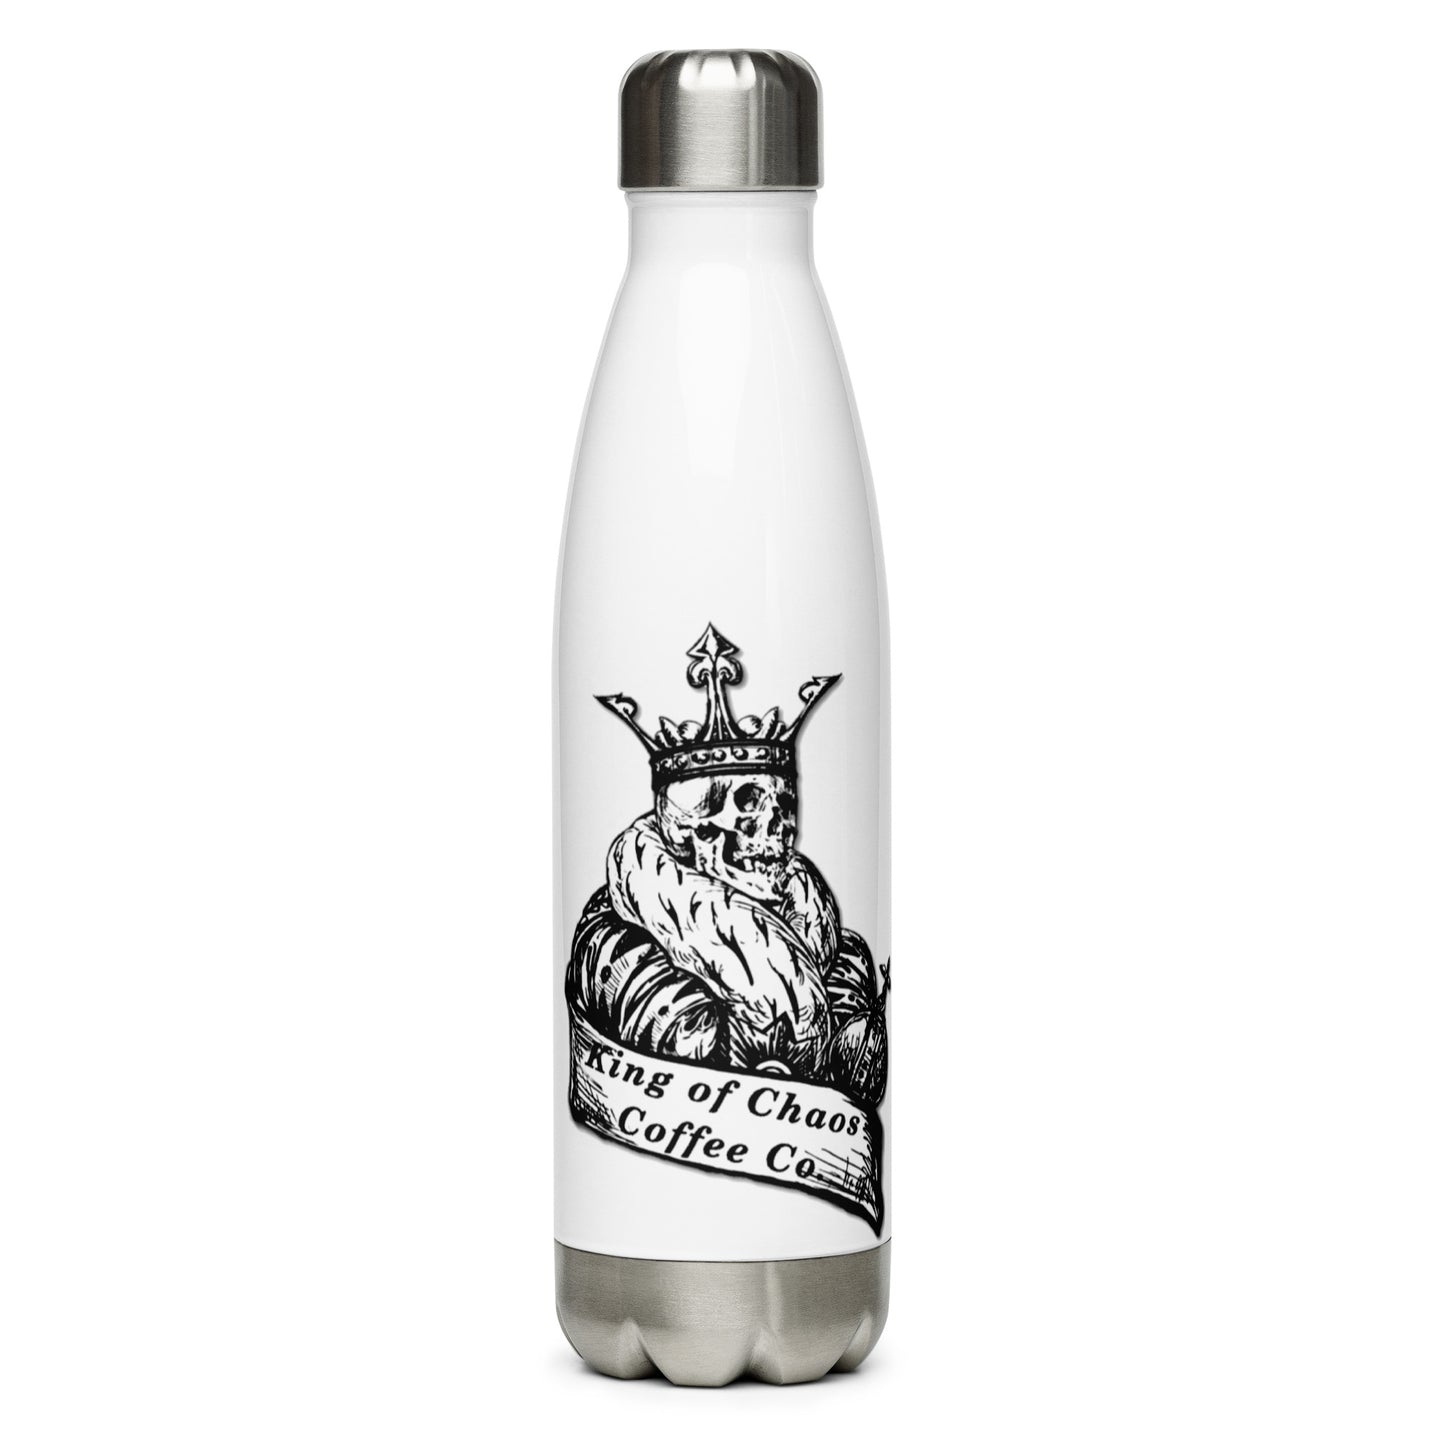 King of Chaos "Let Chaos reign" Stainless Steel Water Bottle